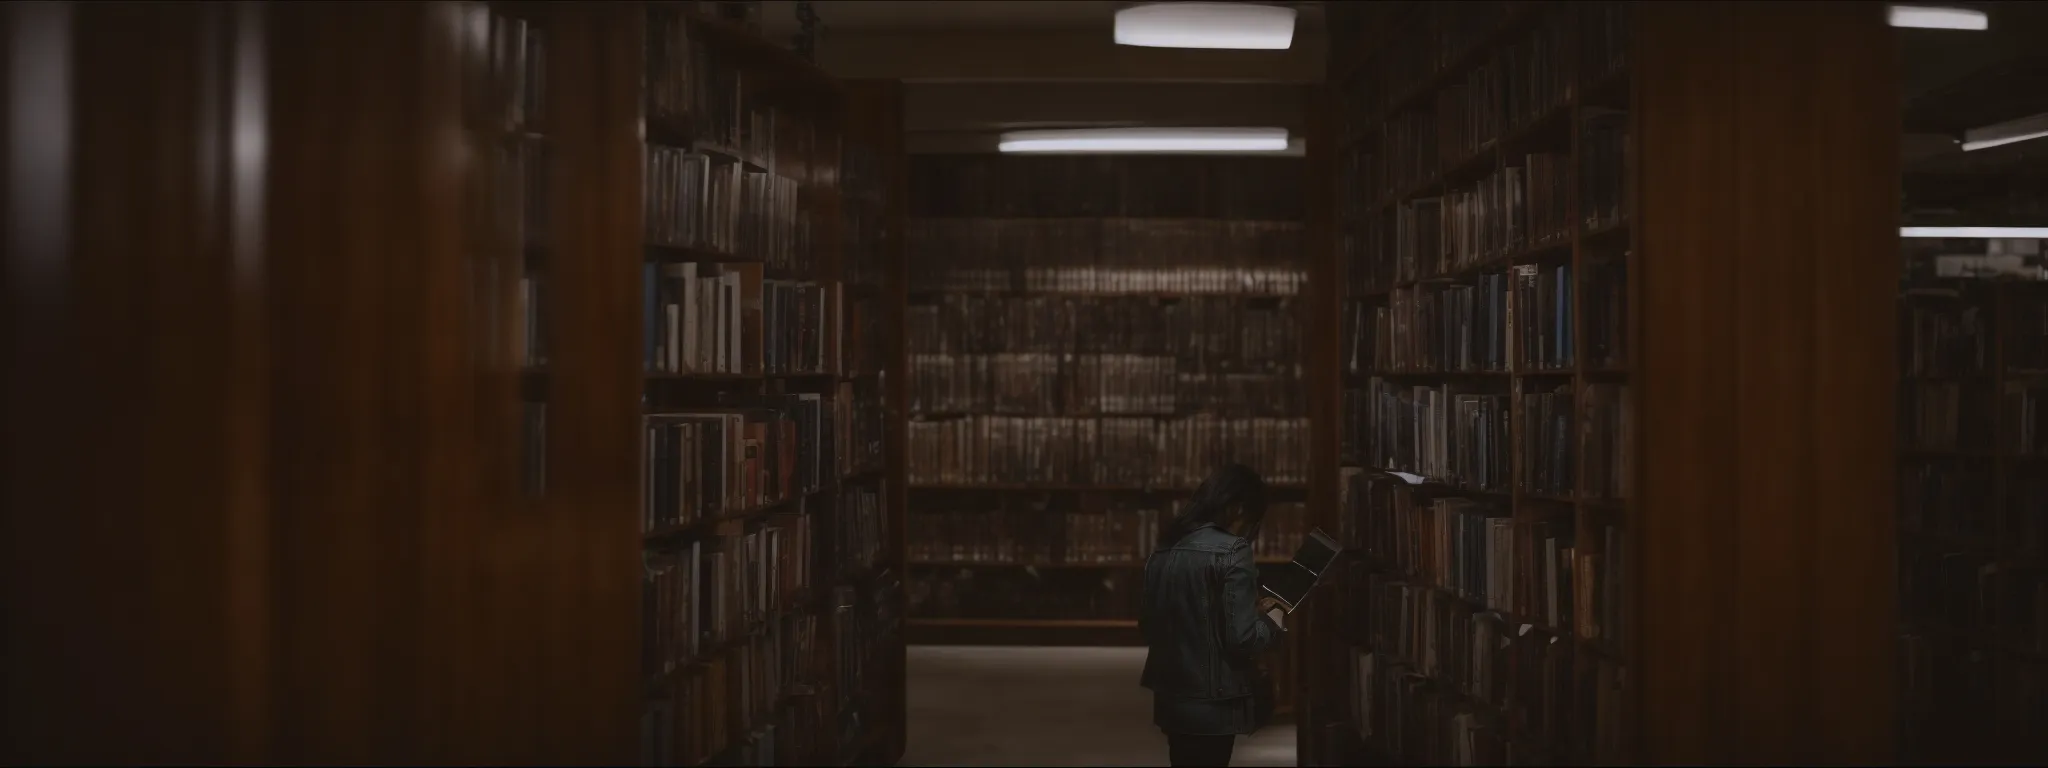 a person standing in a large library, looking through a magnifying glass at a stack of books.